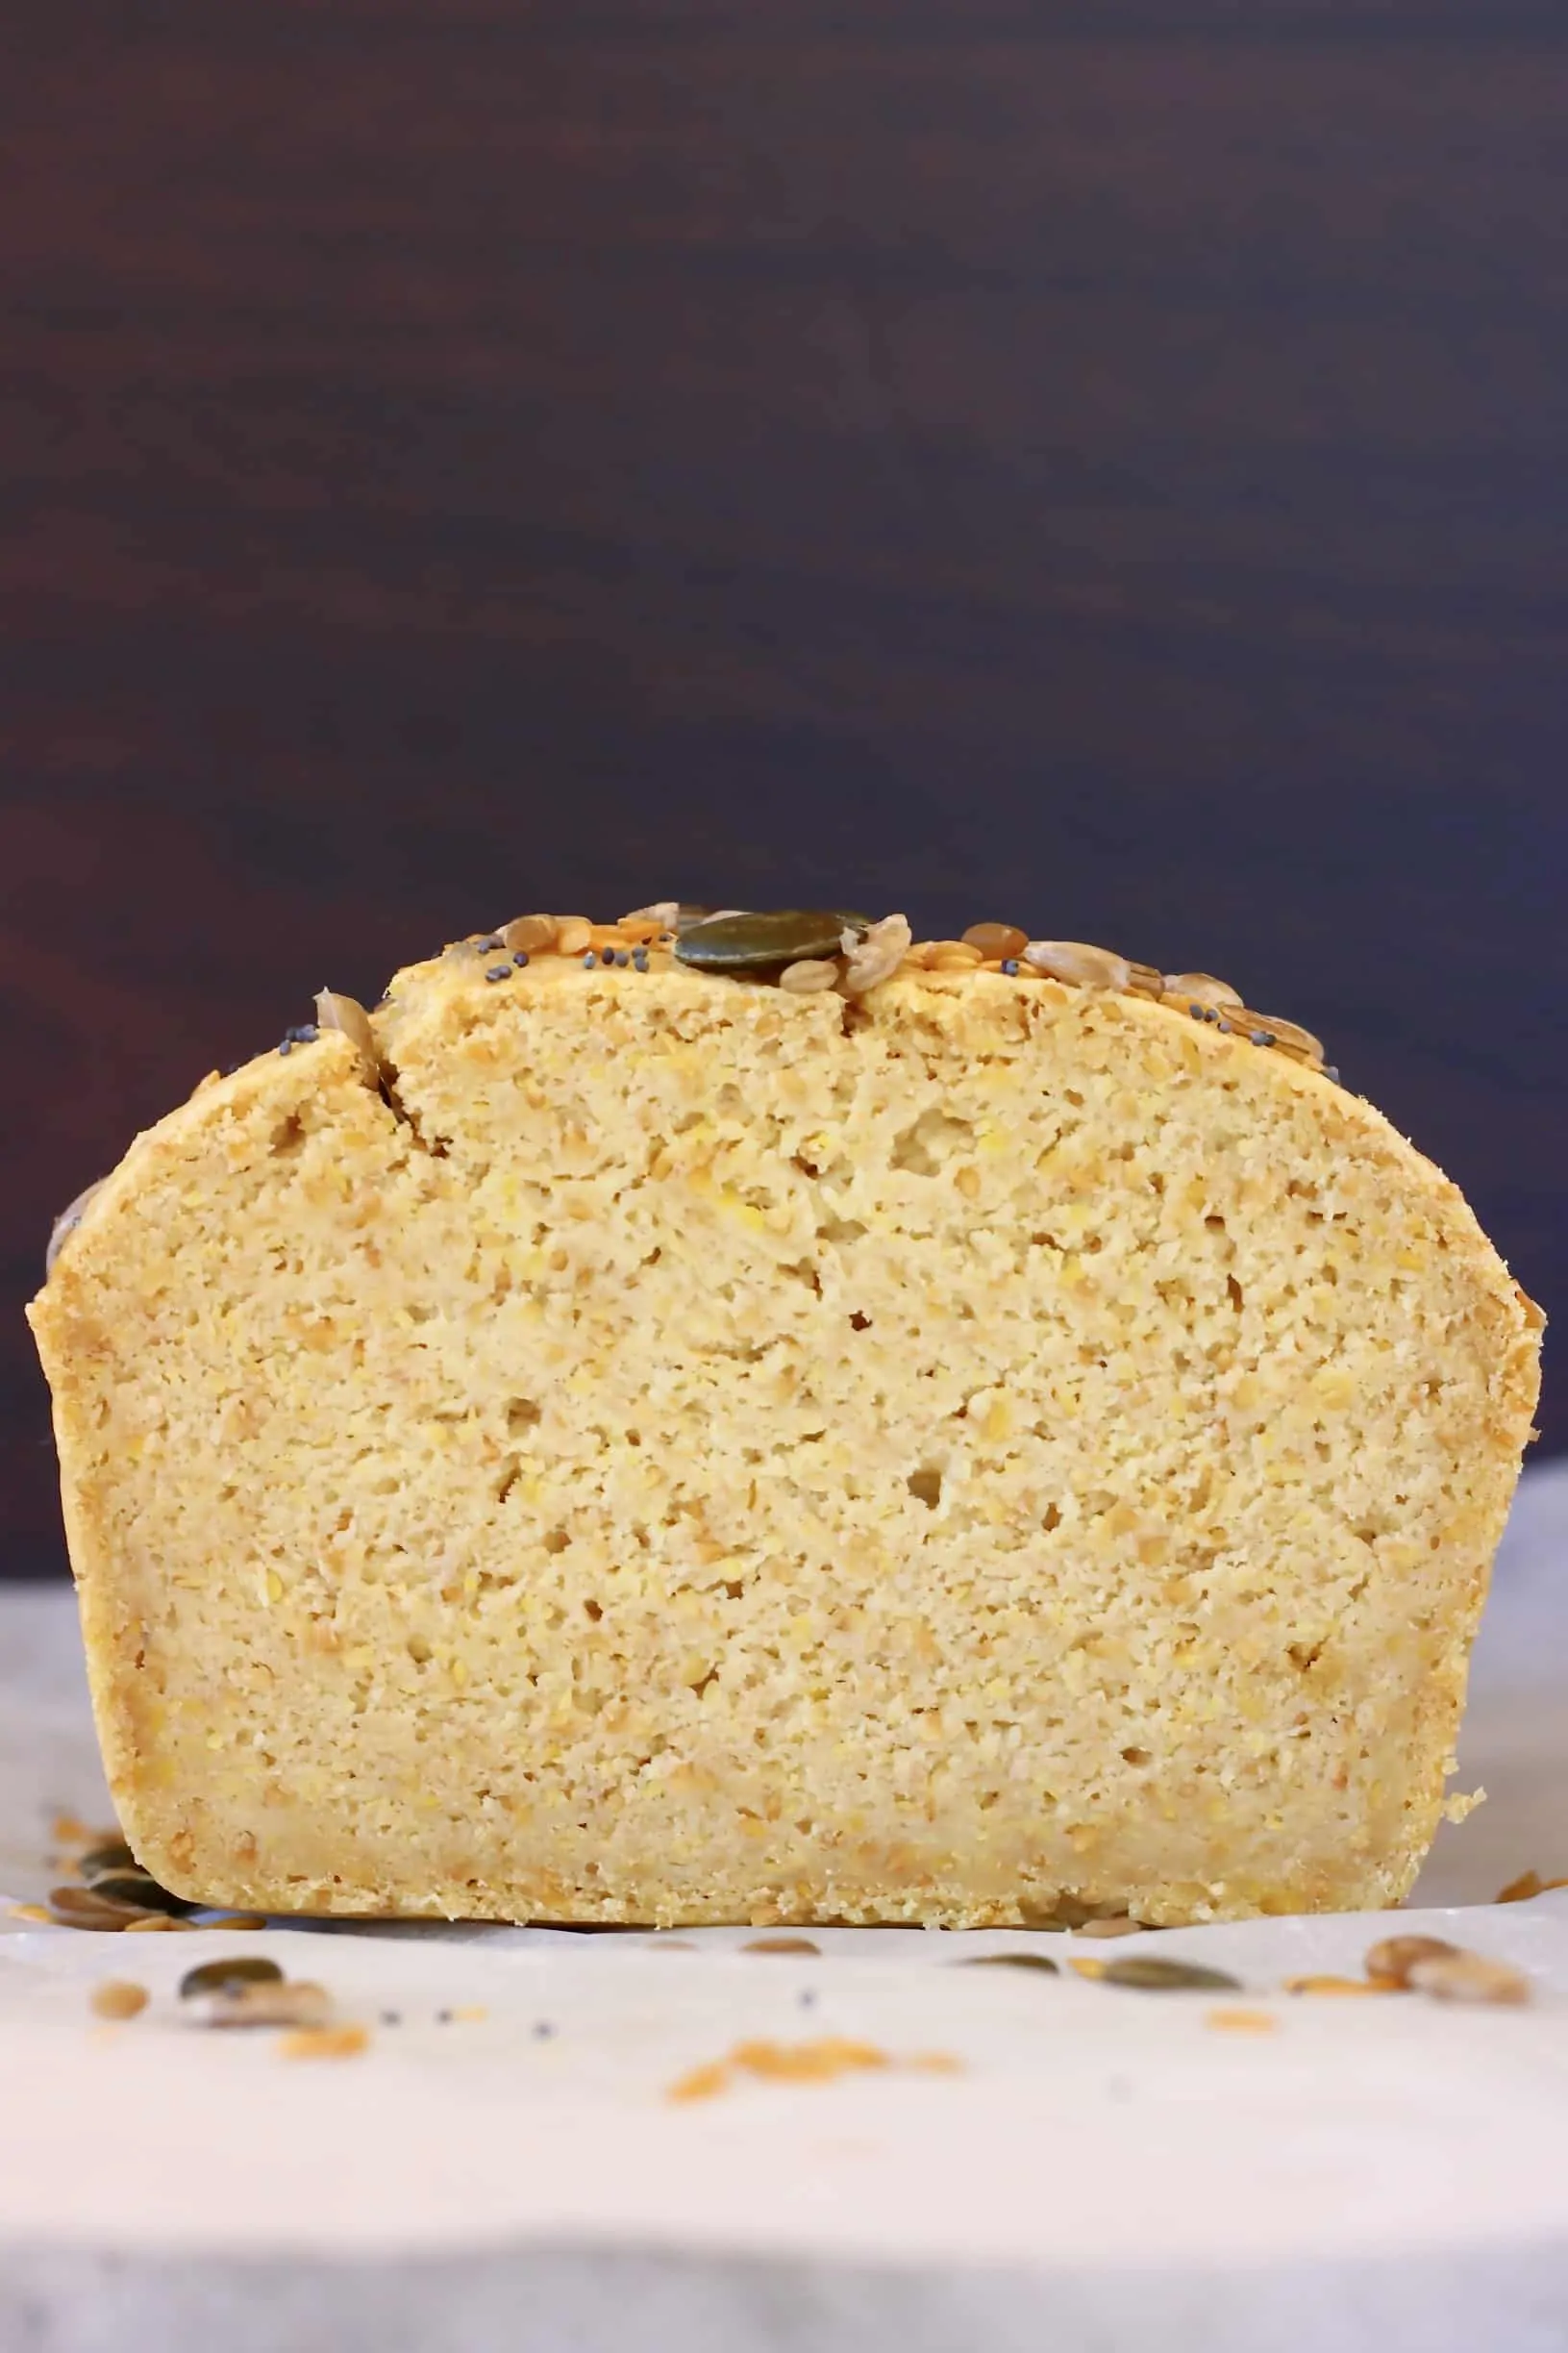 A sliced loaf of flaxseed bread against a dark brown background